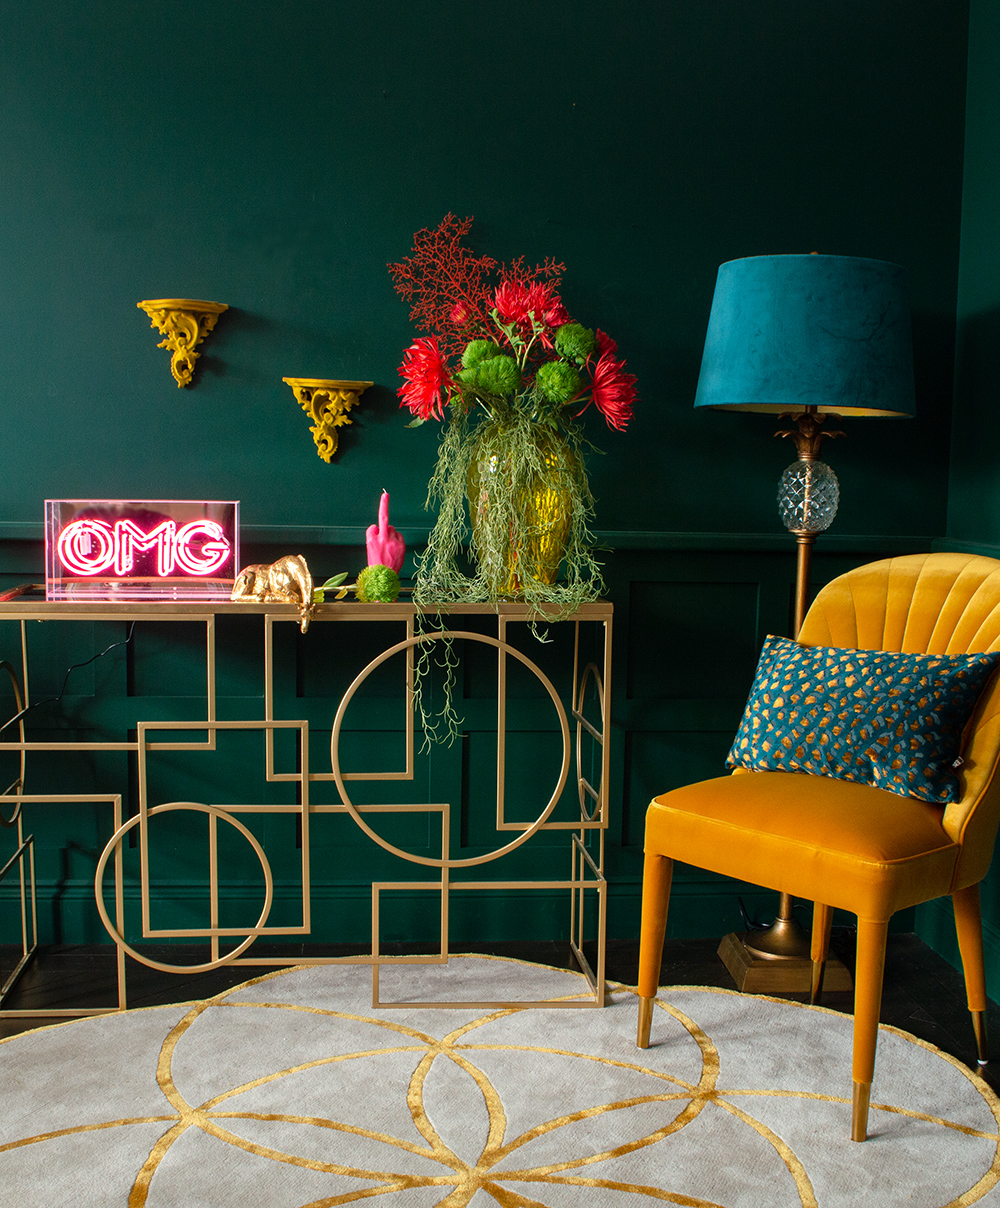 Colourful living room decor with pink OMG neon light, yellow velvet dining chair, gold console table and lots of quirky accessories. All available from Audenza